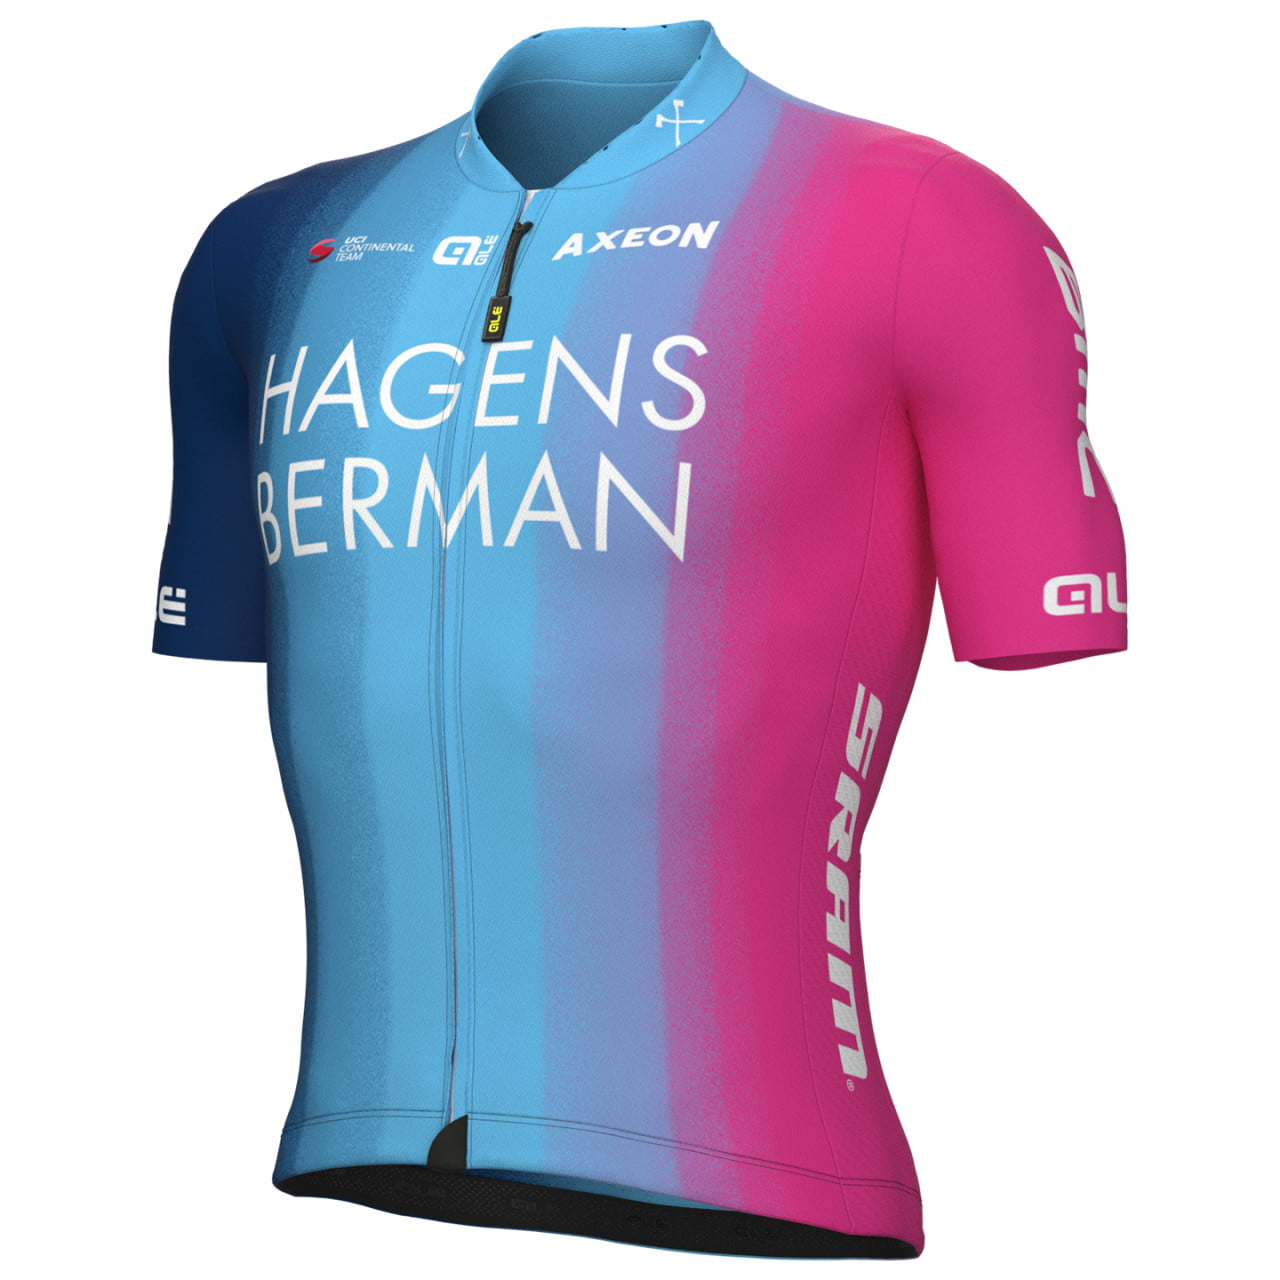 Maillot manches courtes HAGENS BERMAN AXEON 2022